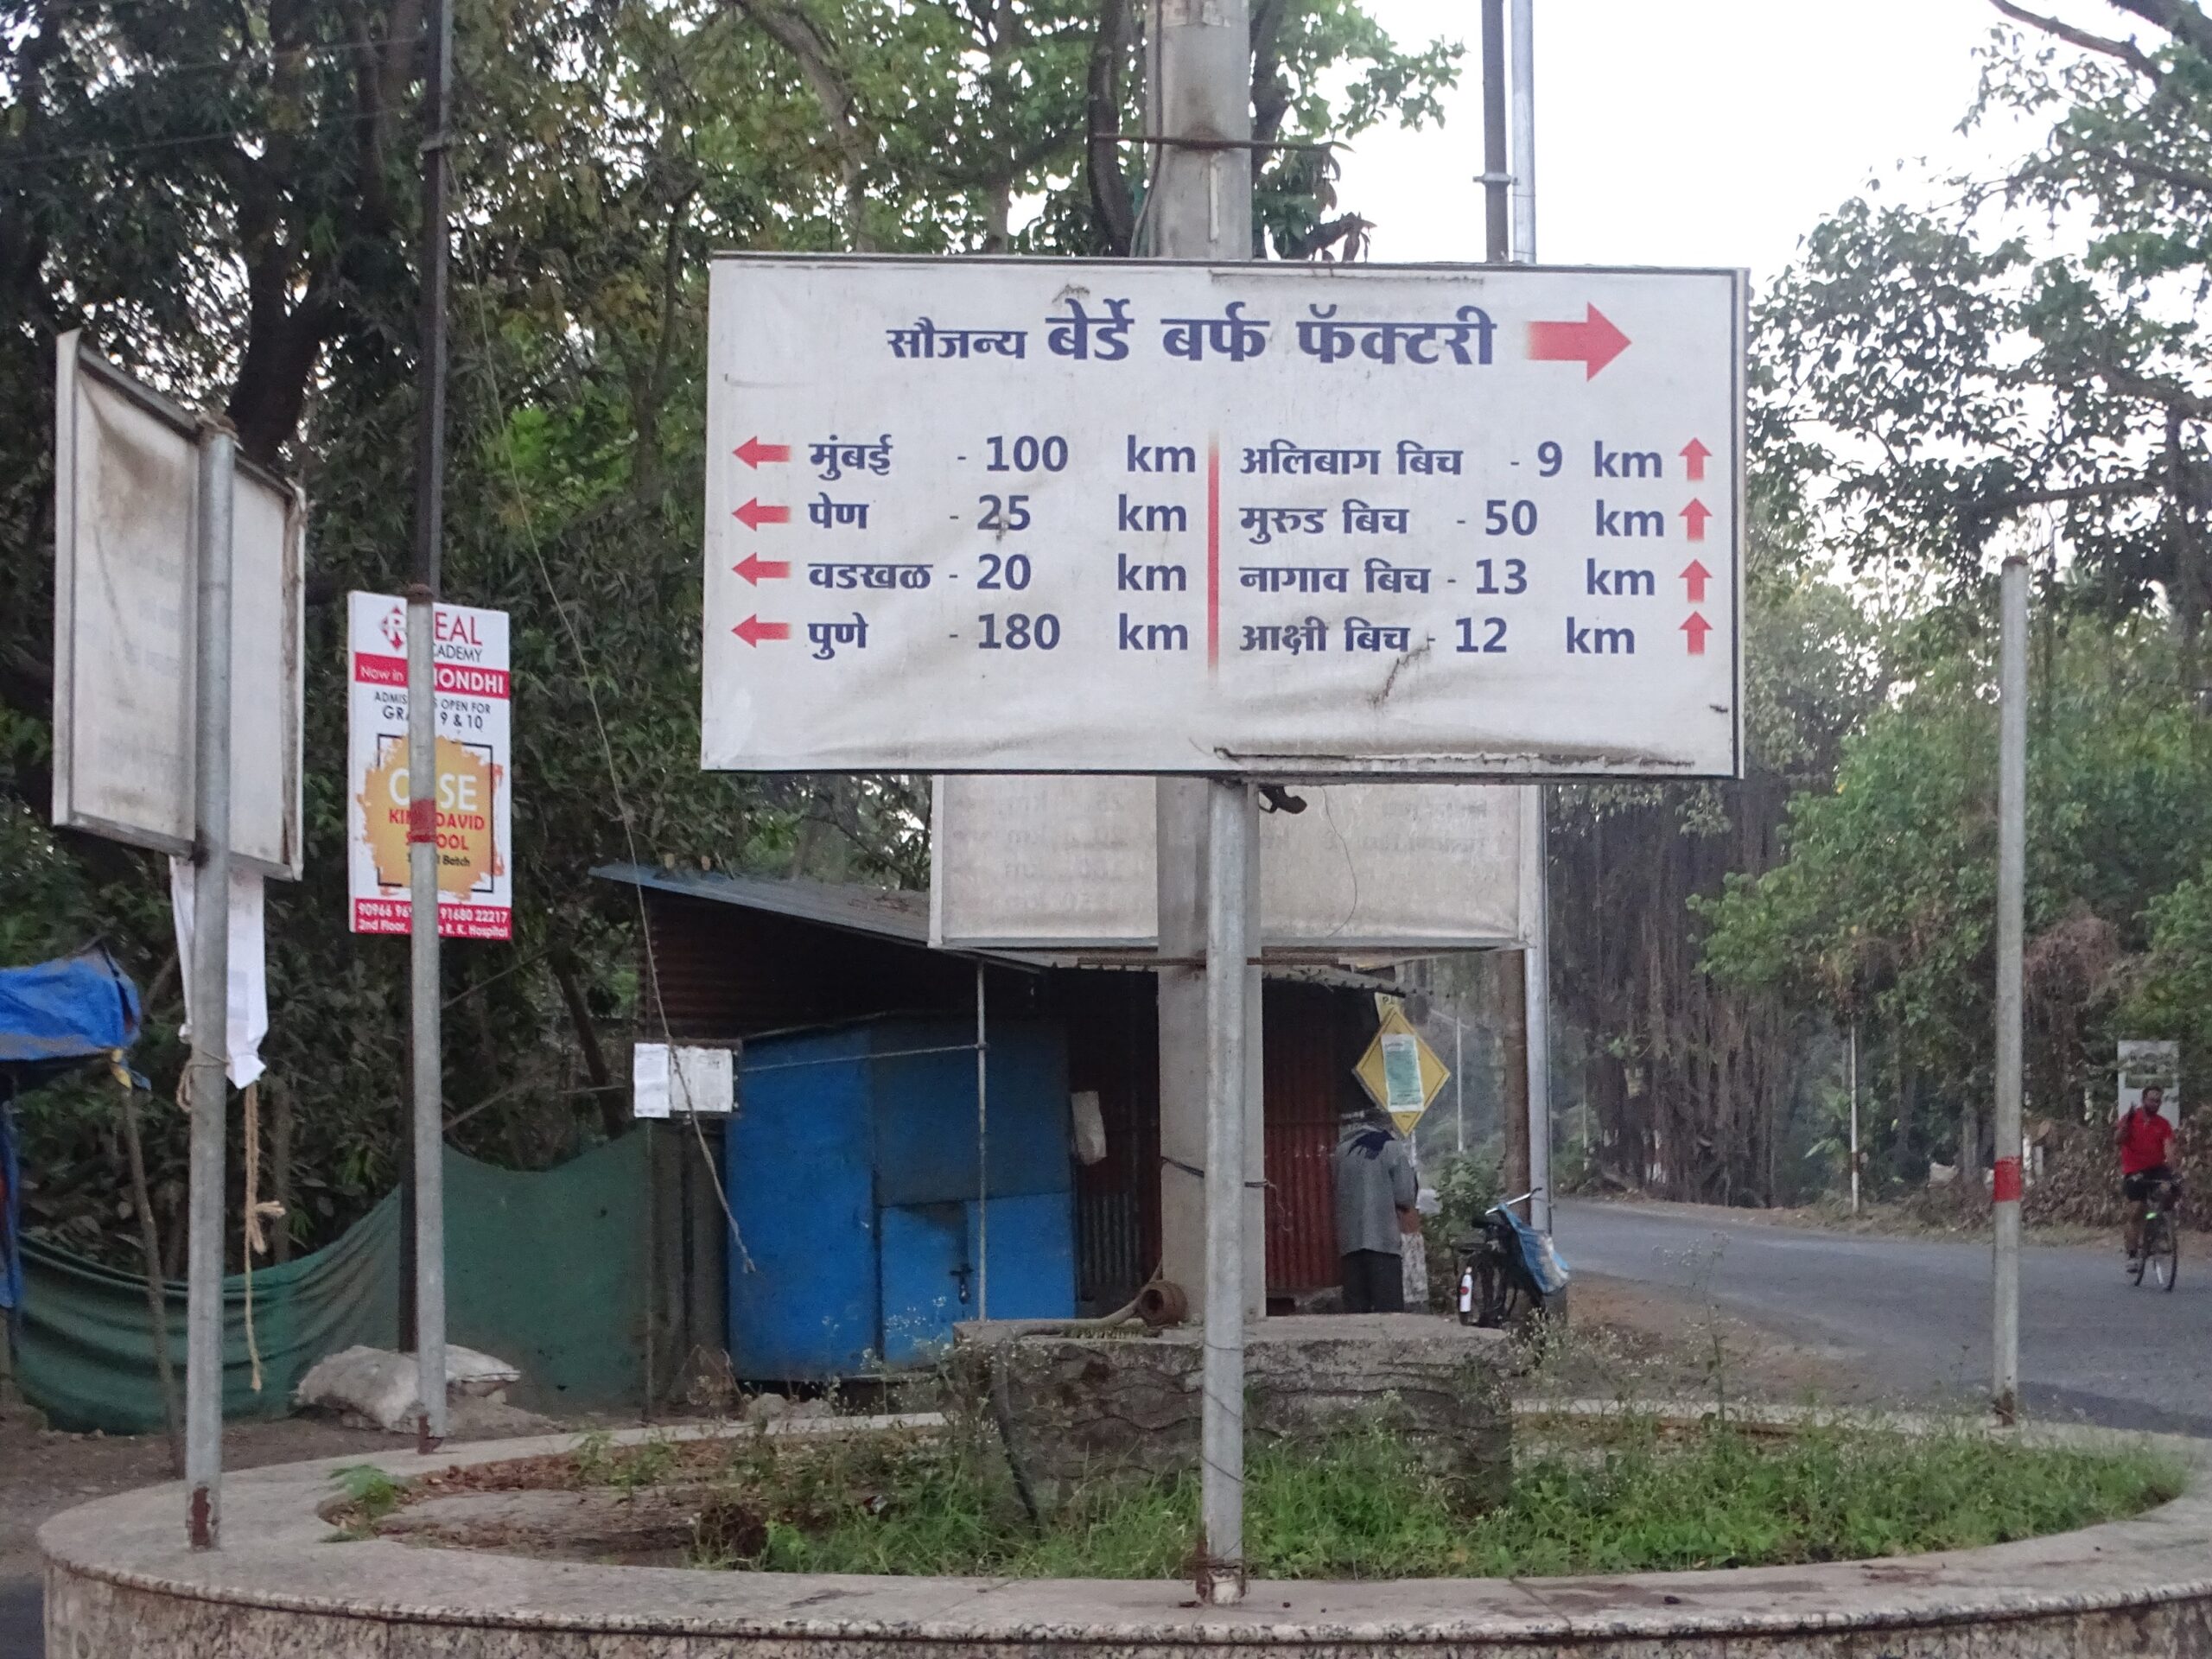 Distance Chart - Alibag (Maharashtra, India) to various Cities, Towns and Beaches